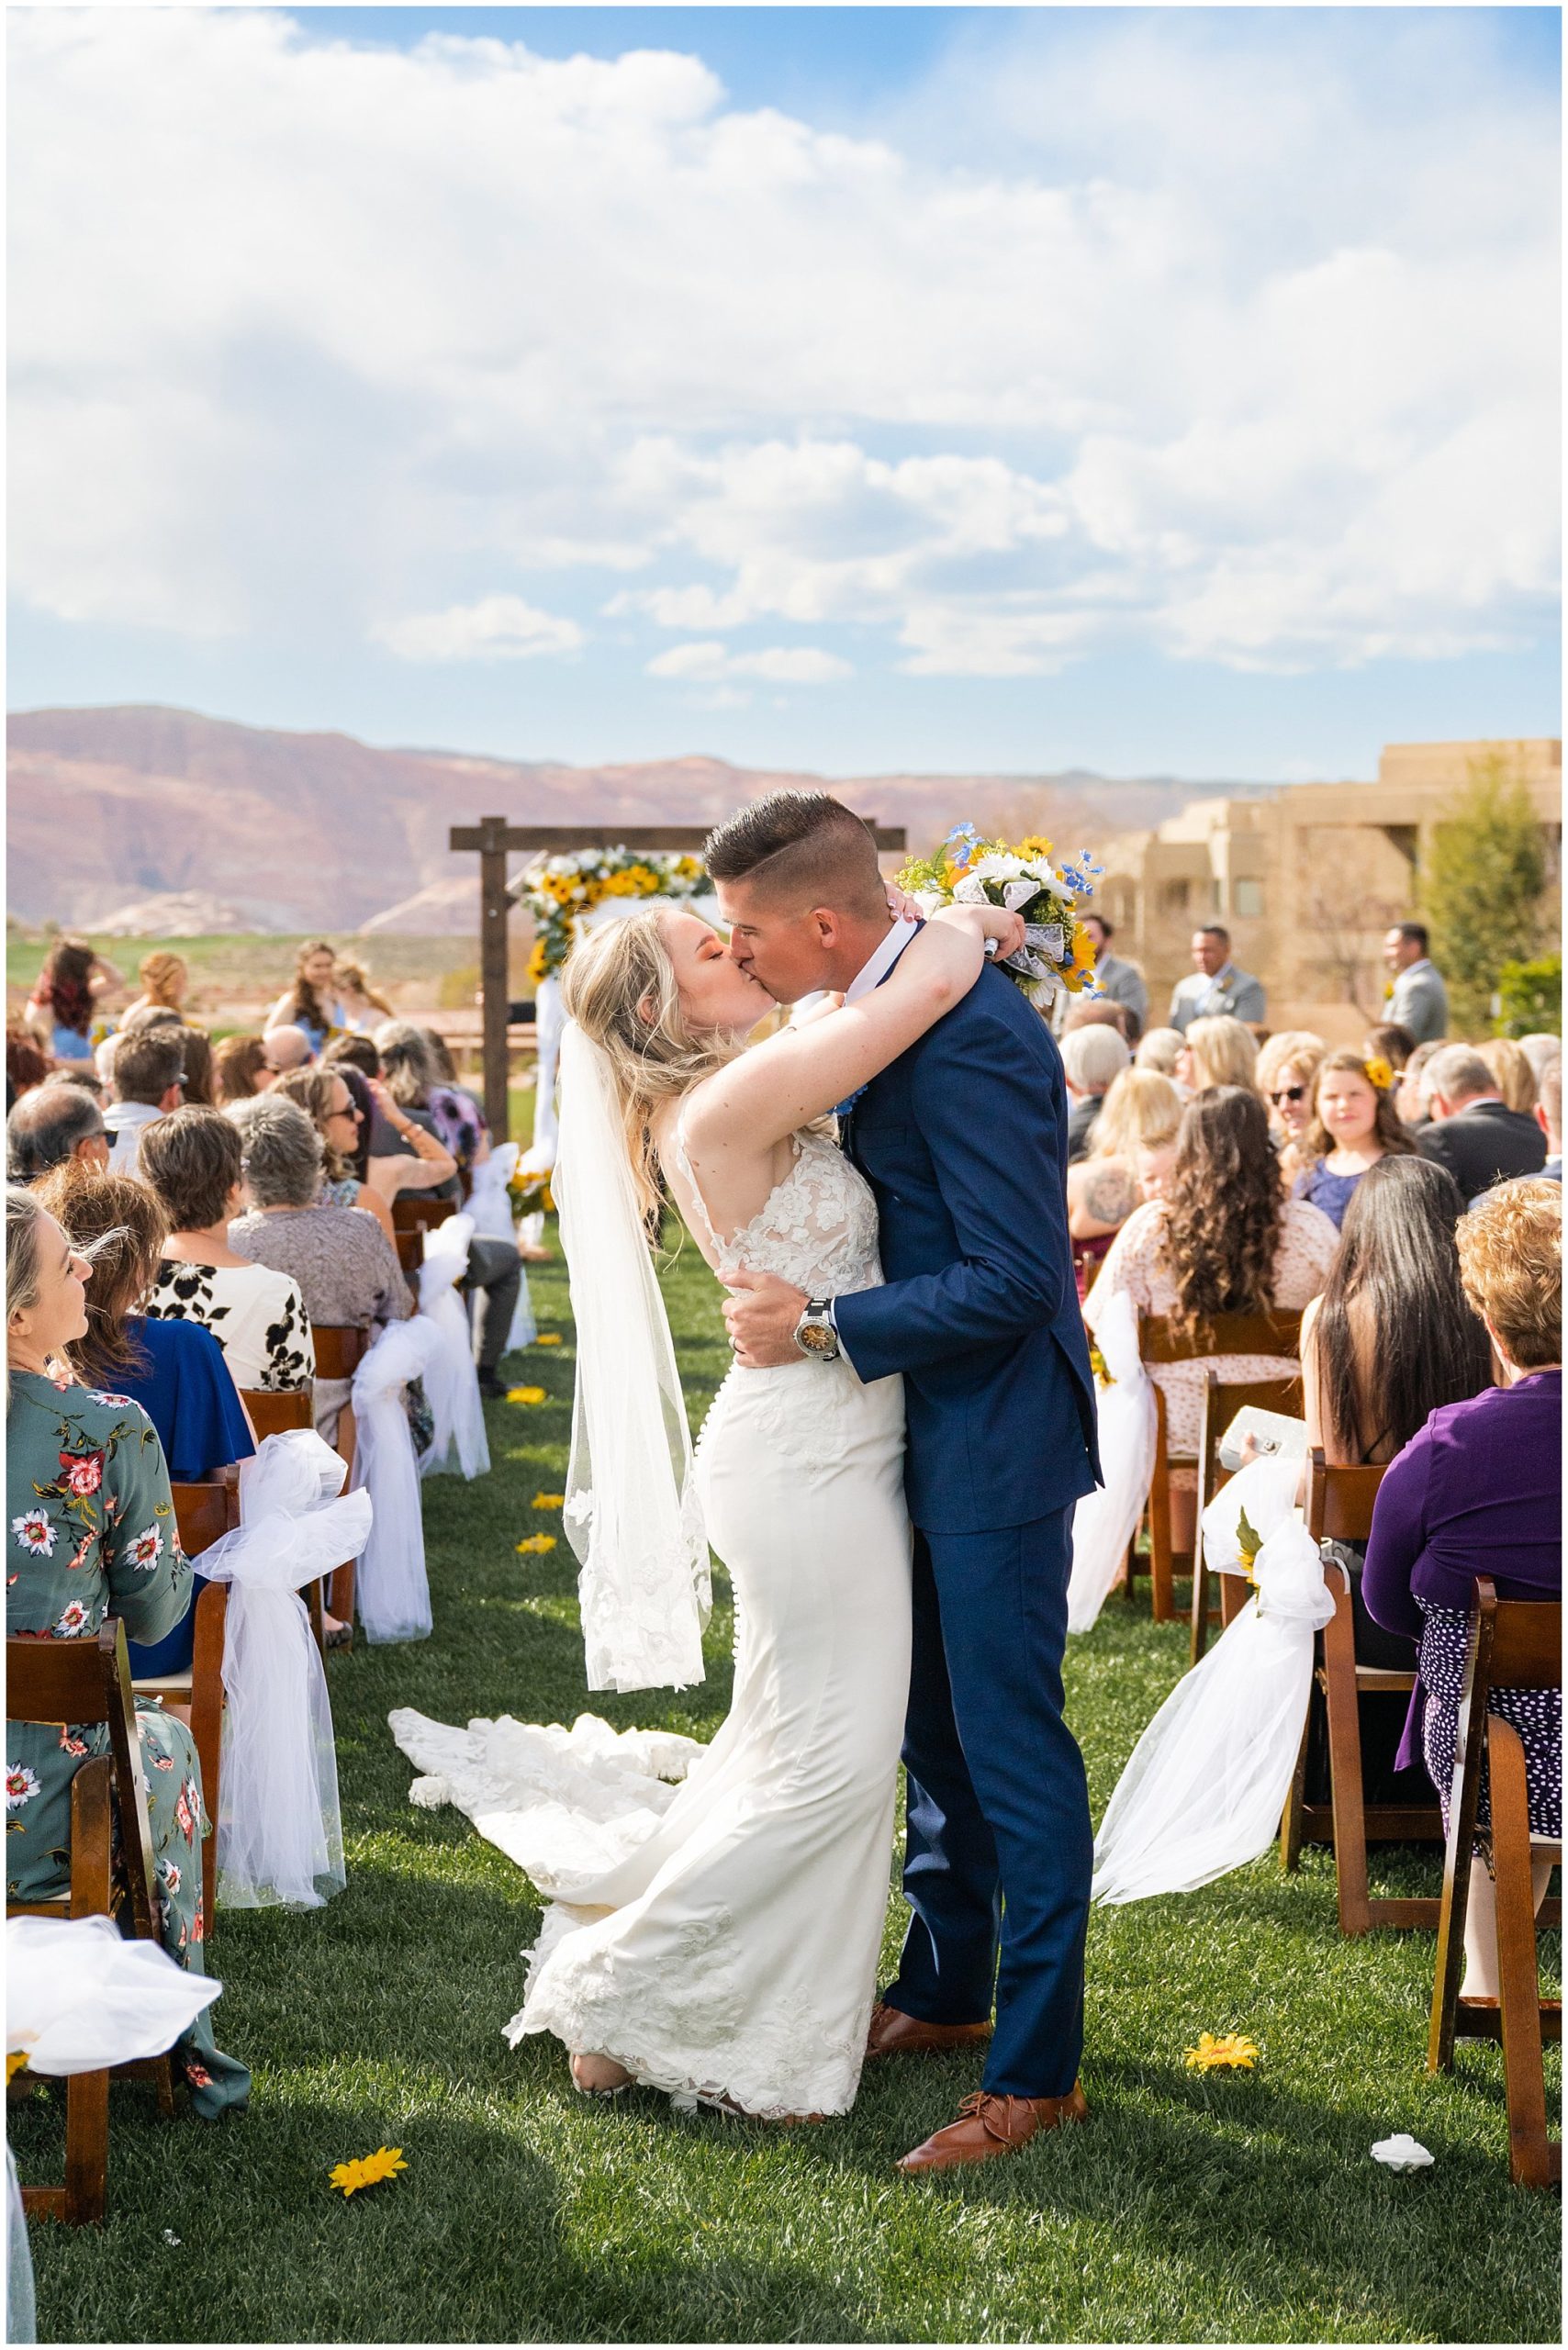 Wedding in the red rocks of southern Utah. Wedding ceremony.